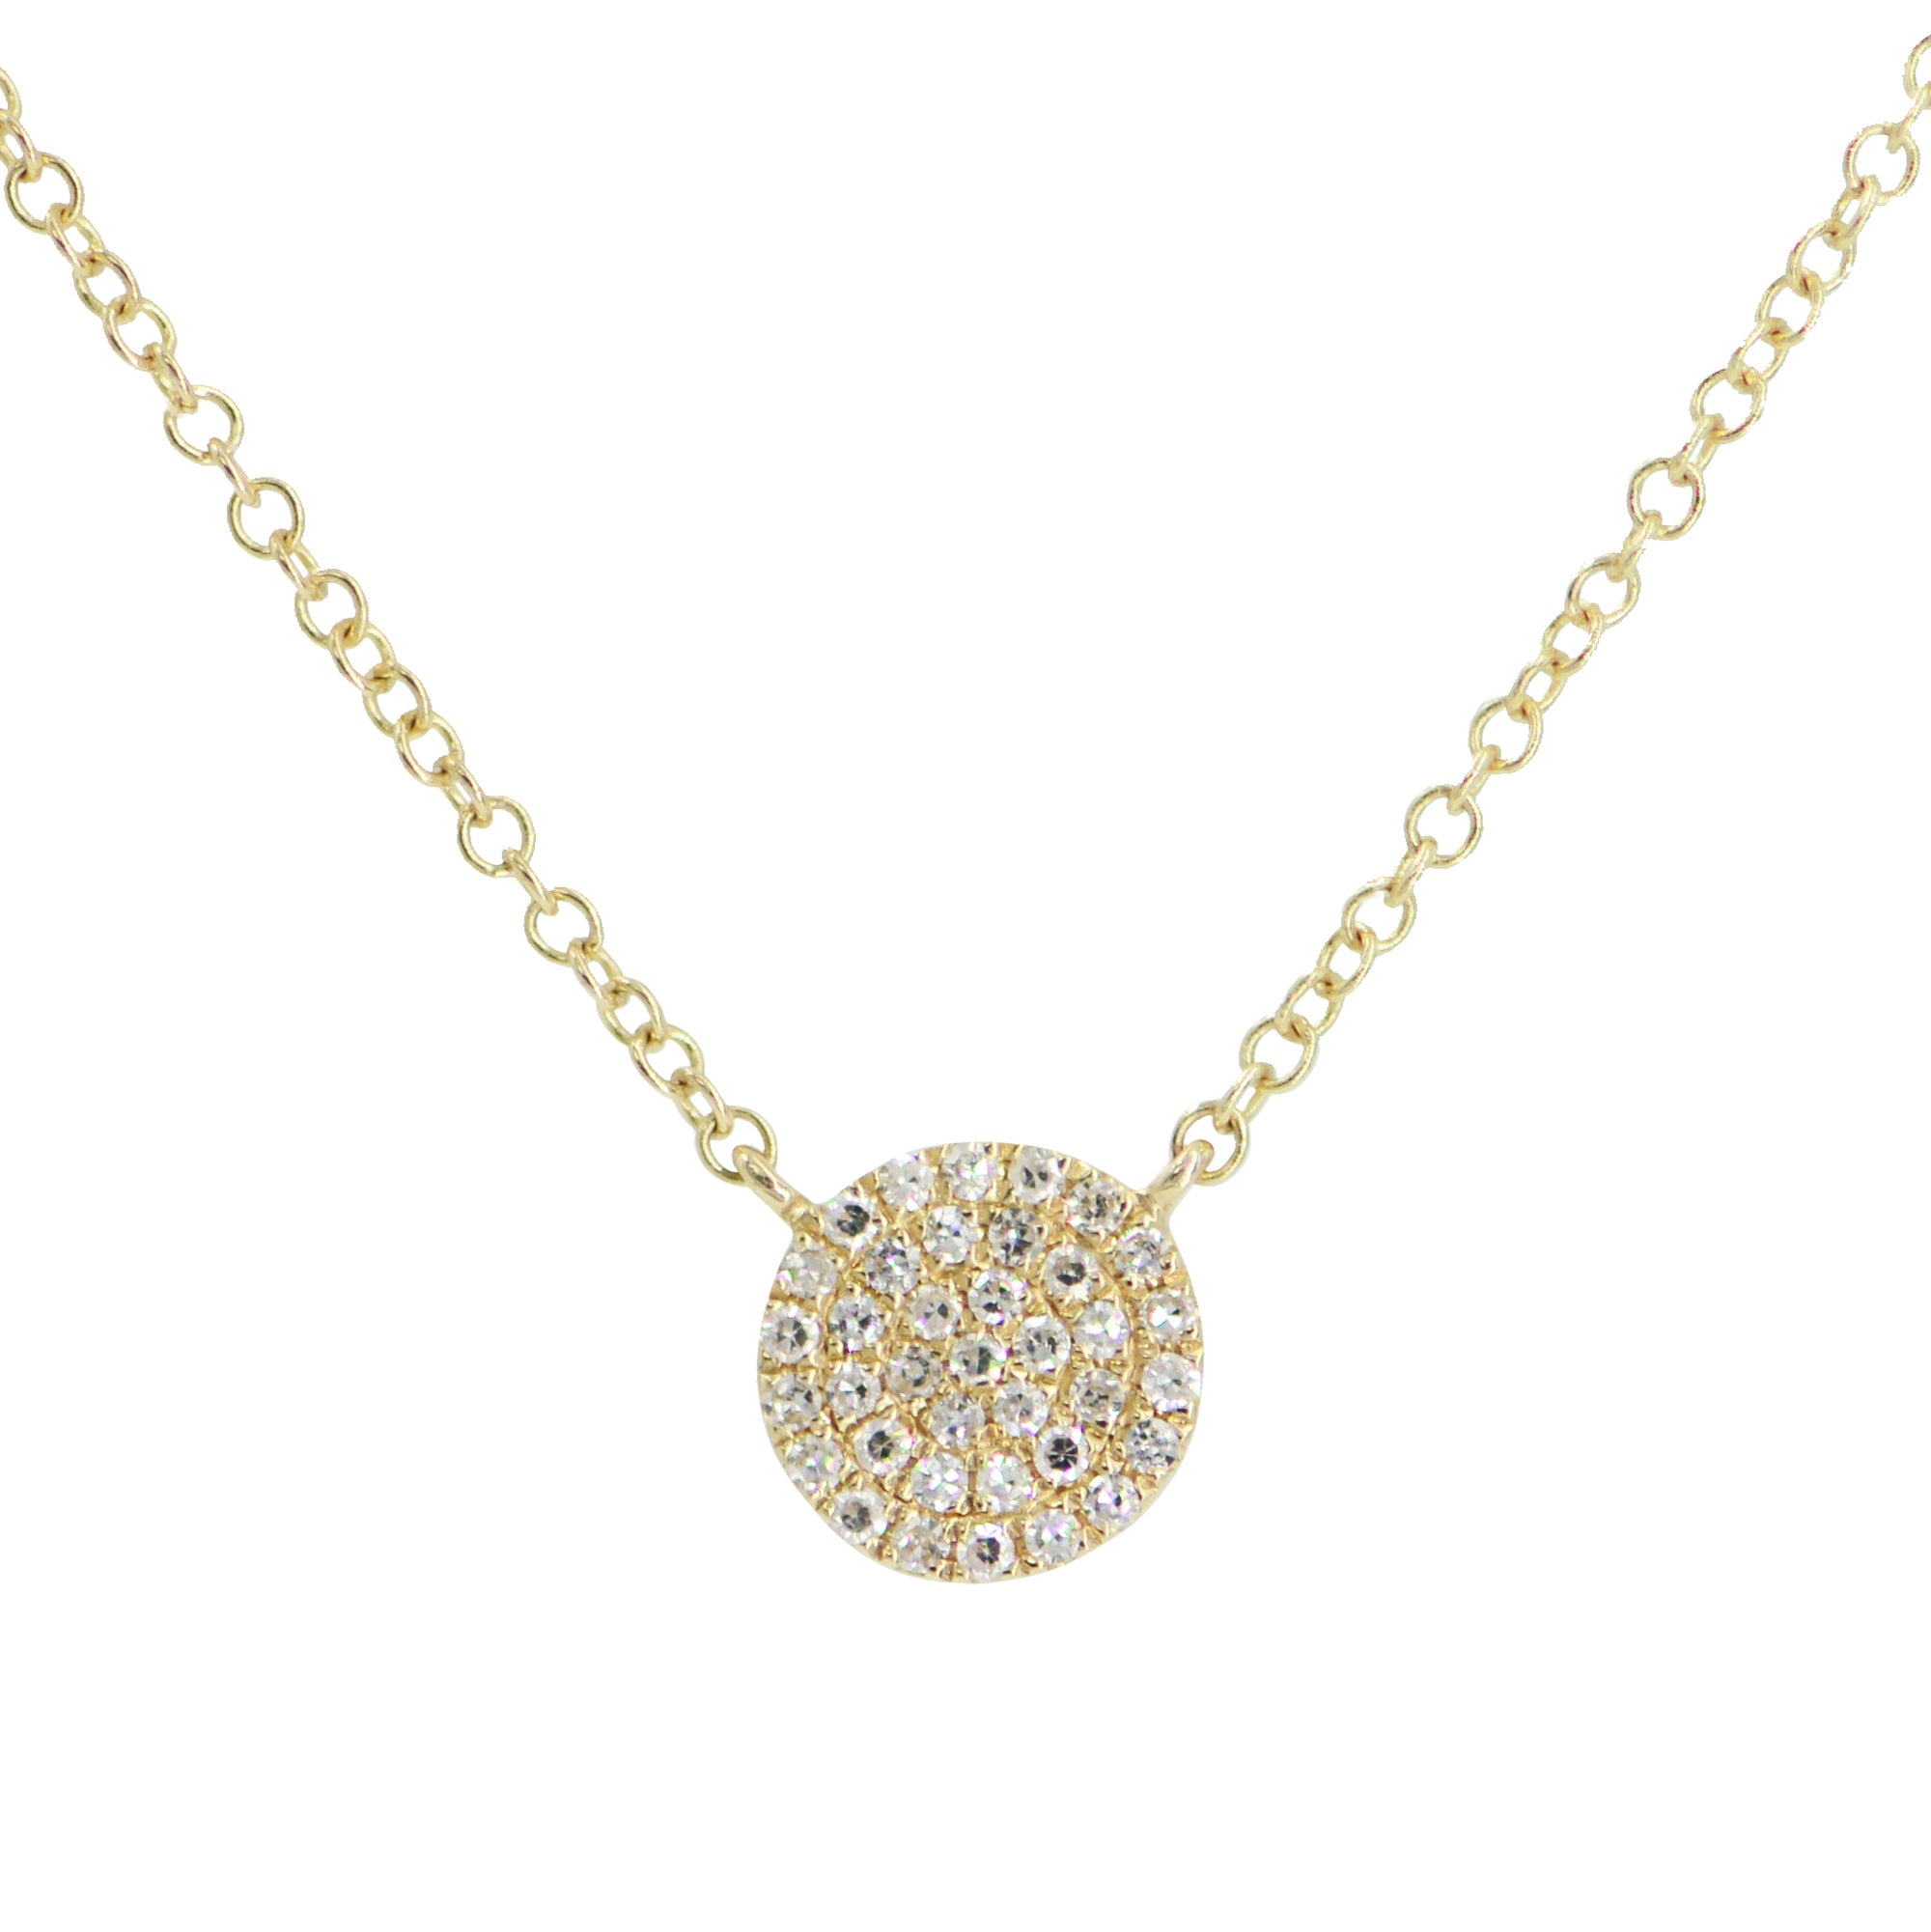 Mini Diamond Pave Disk Necklace in 14k Yellow Gold